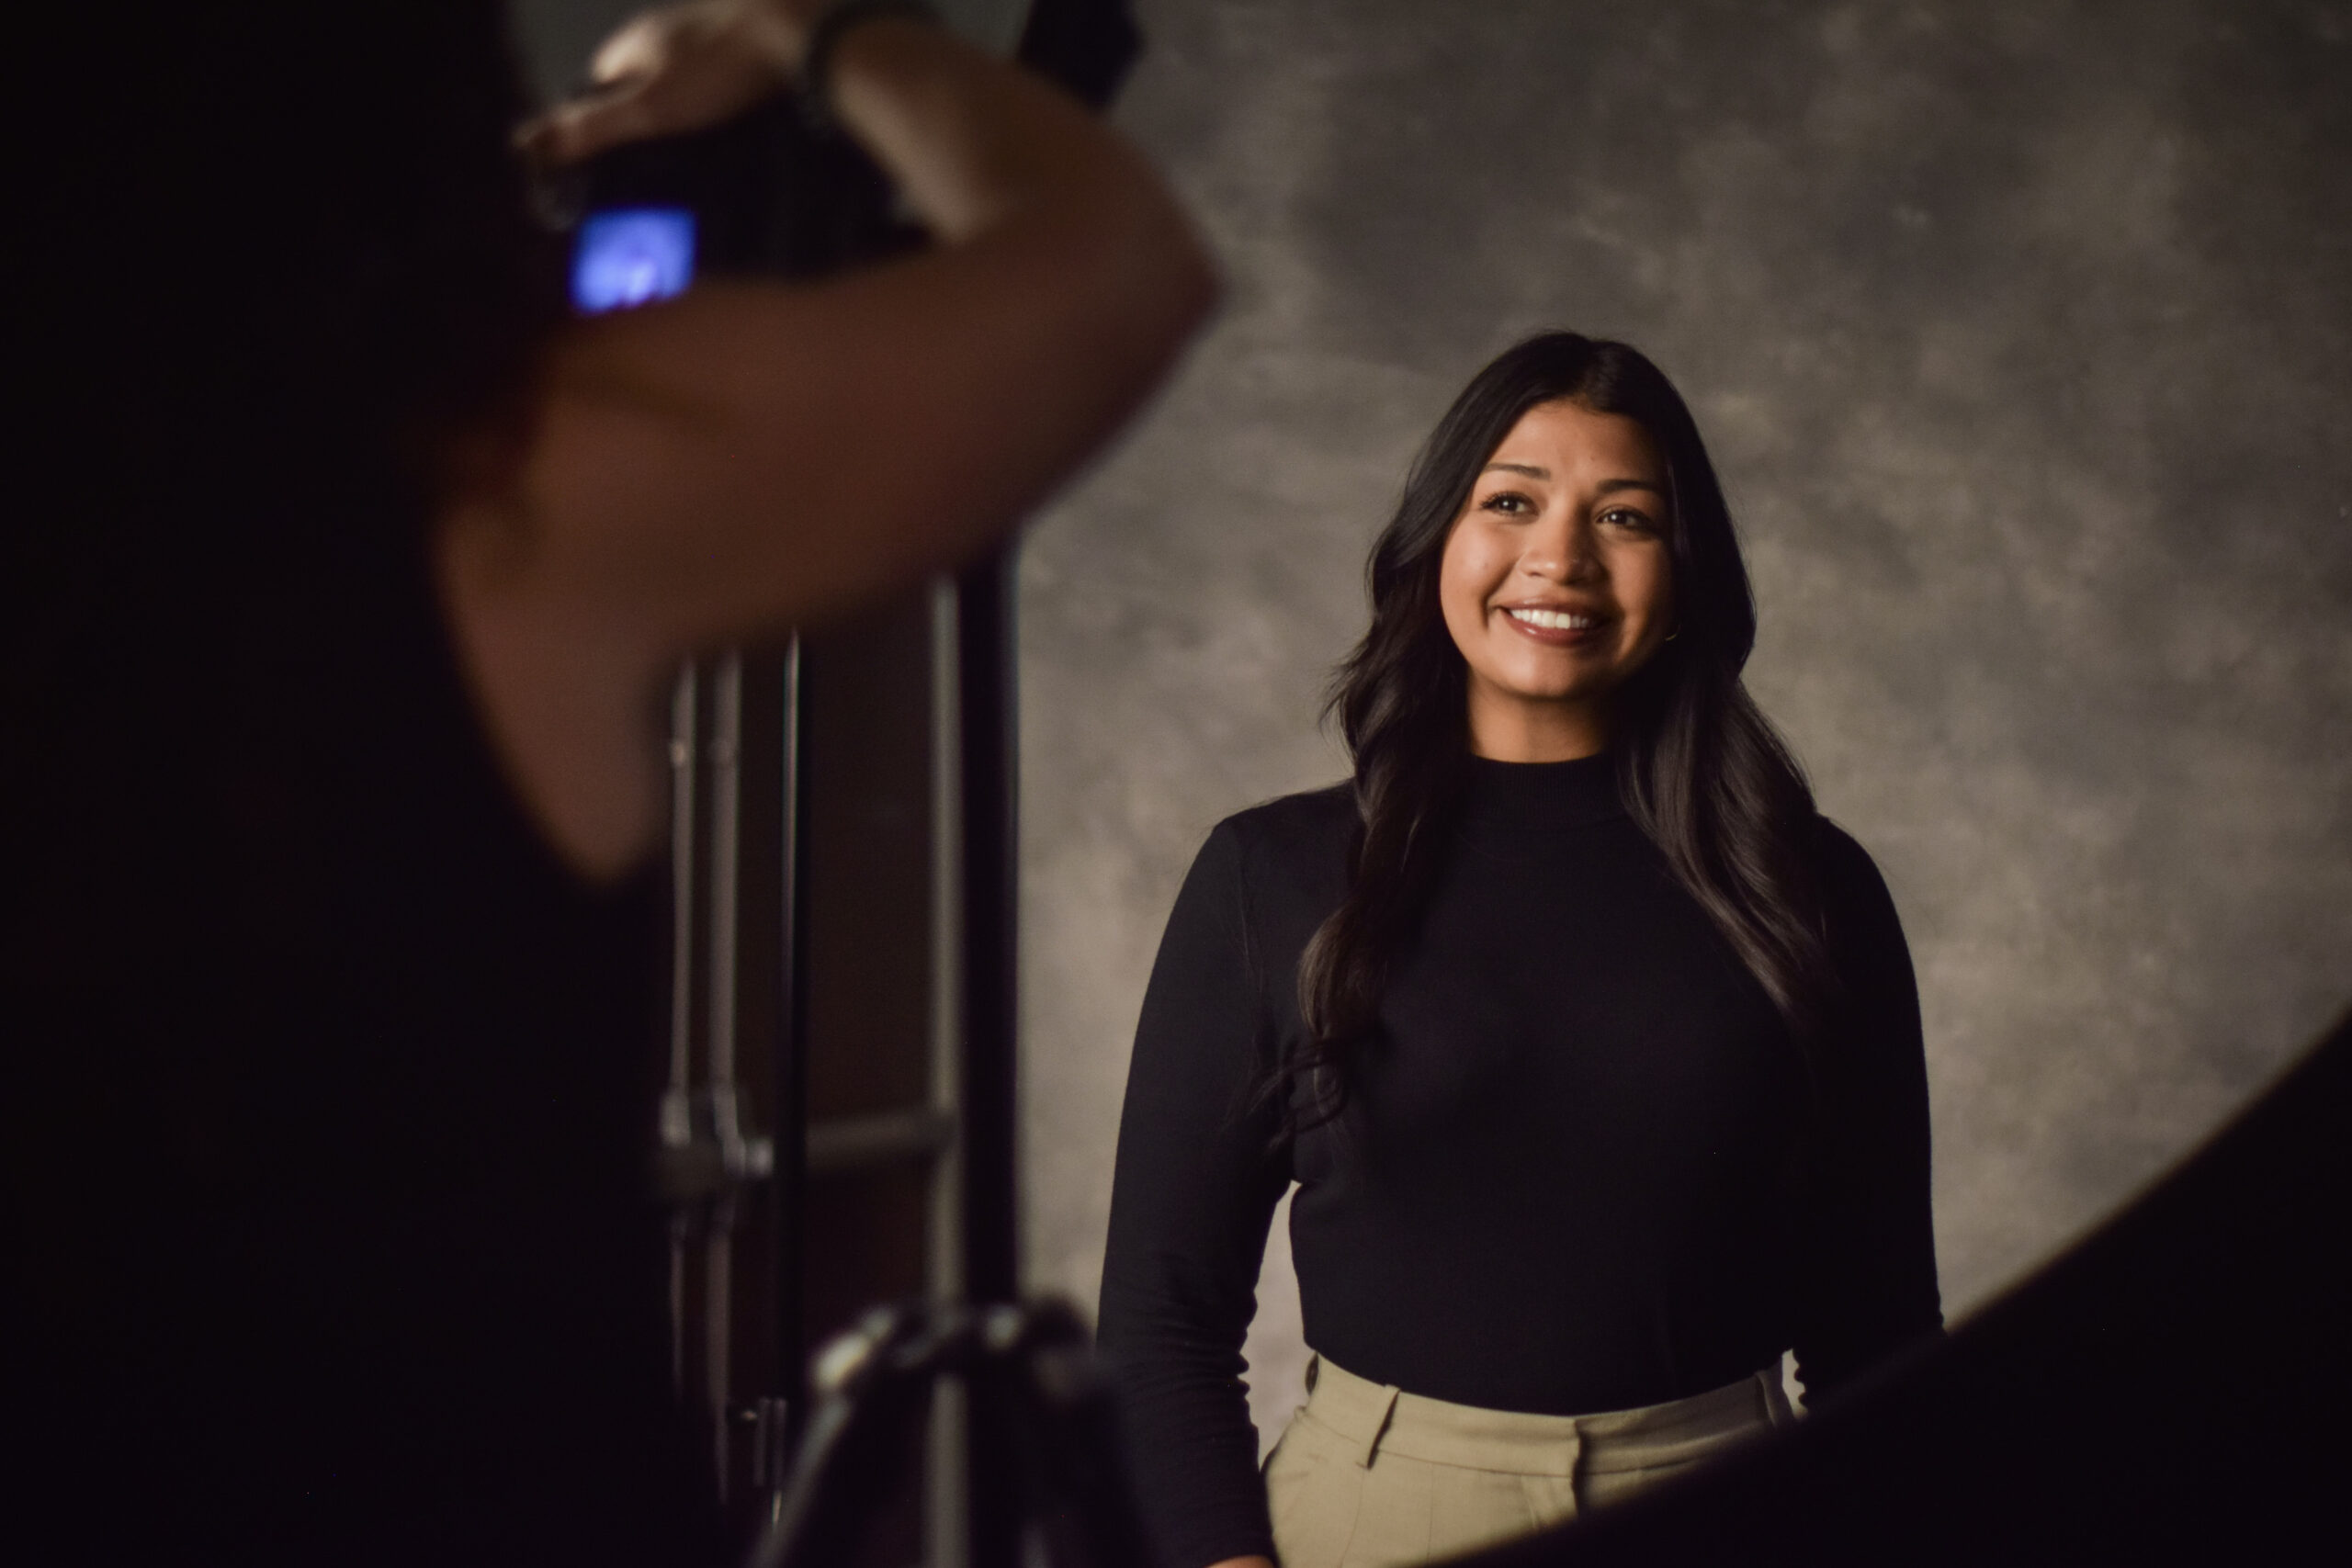 Student smiling at a camera while having a professional headshot taken